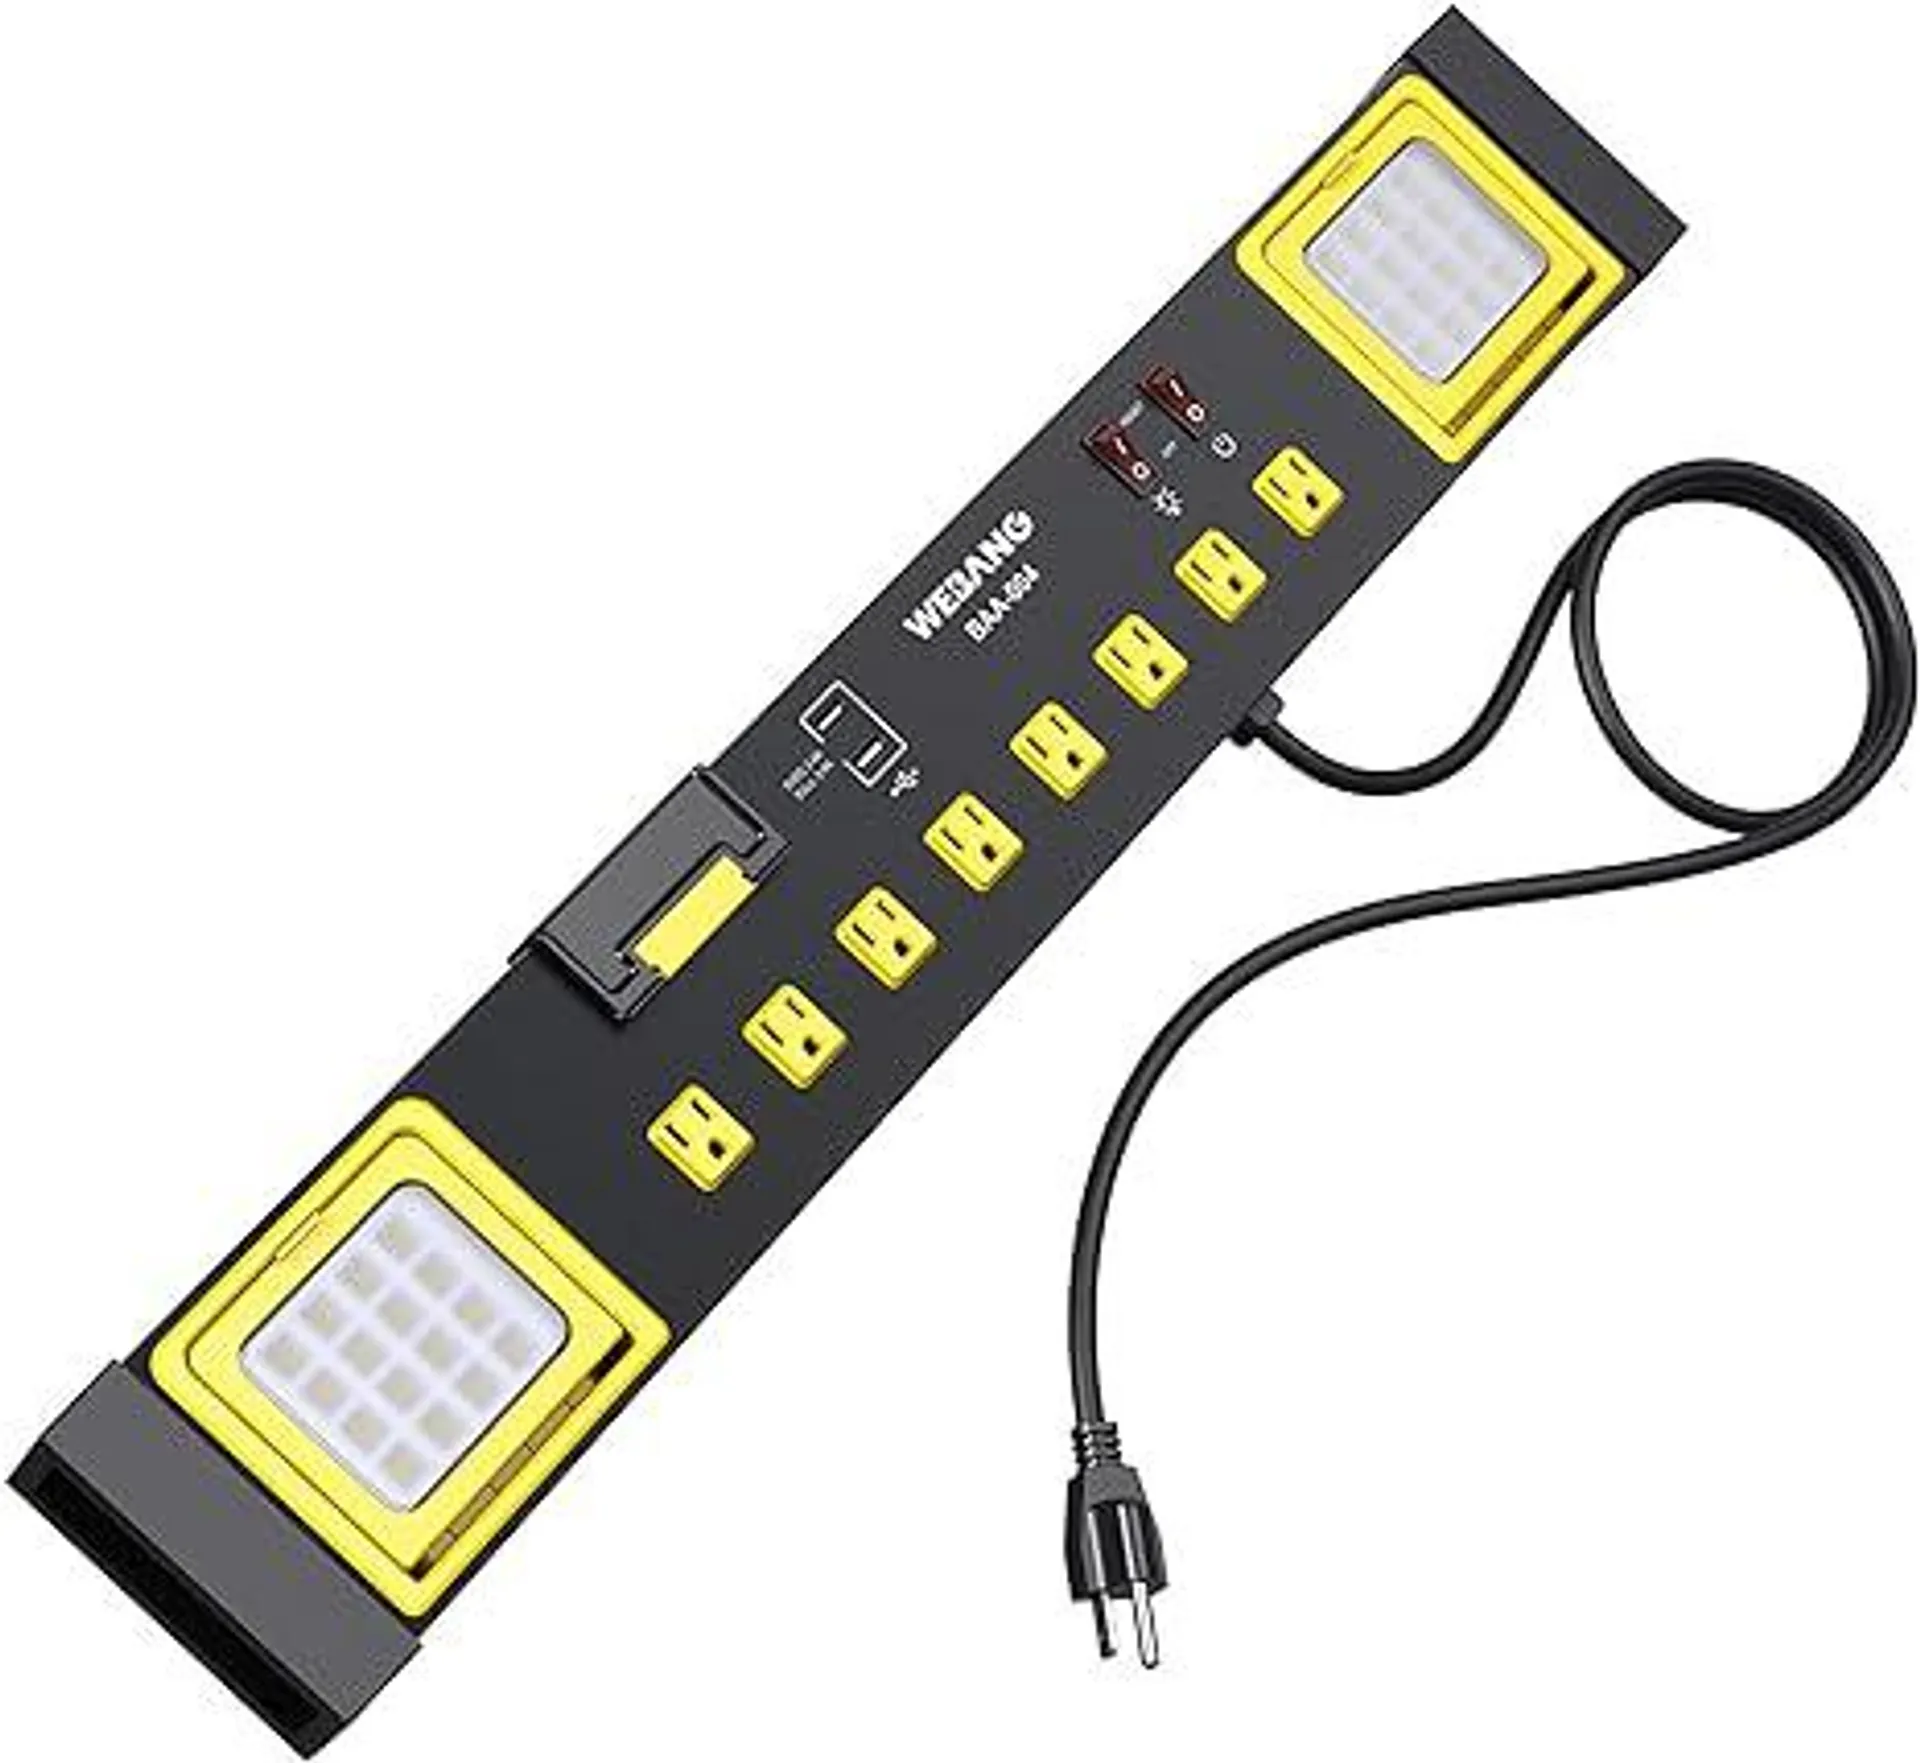 WEBANG Heavy Duty Metal Power Strip Surge Protector with 8 Outlets,2 USB Ports, Led Worklight, 15A Circuit Breaker, Wall Mount, UL Listed for Workshop/Garage/Countertop